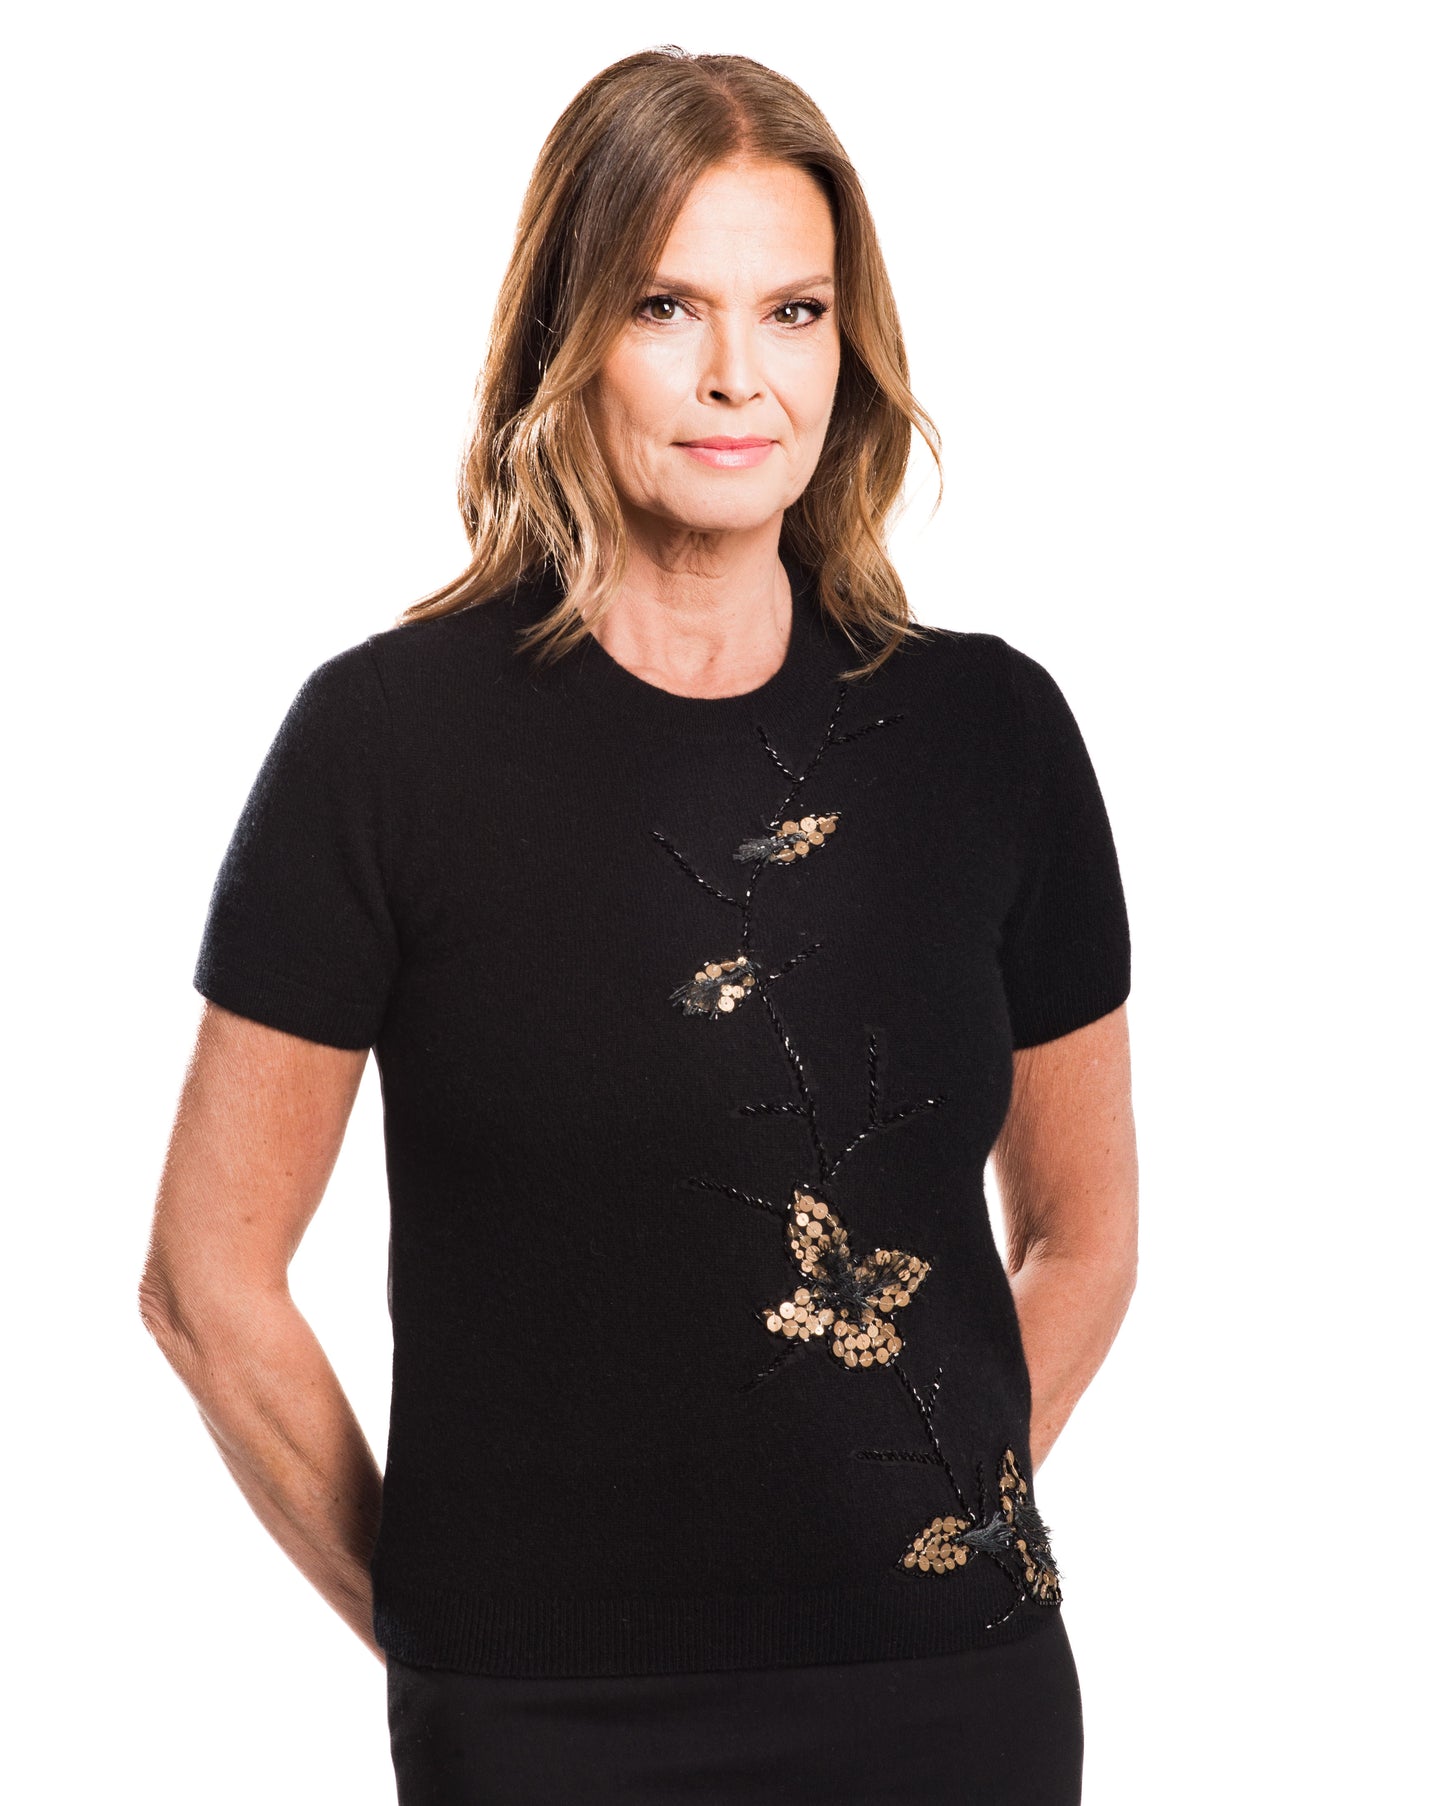 MEDIUM BLACK CREW NECK SHORT SLEEVE CASHMERE SWEATER WITH ANTIQUE GOLD SEQUIN EMBROIDERED FLOWERS AND LEAVES WITH JET BEADING AND SILK ORGANZA BACK WITH SILK LINING